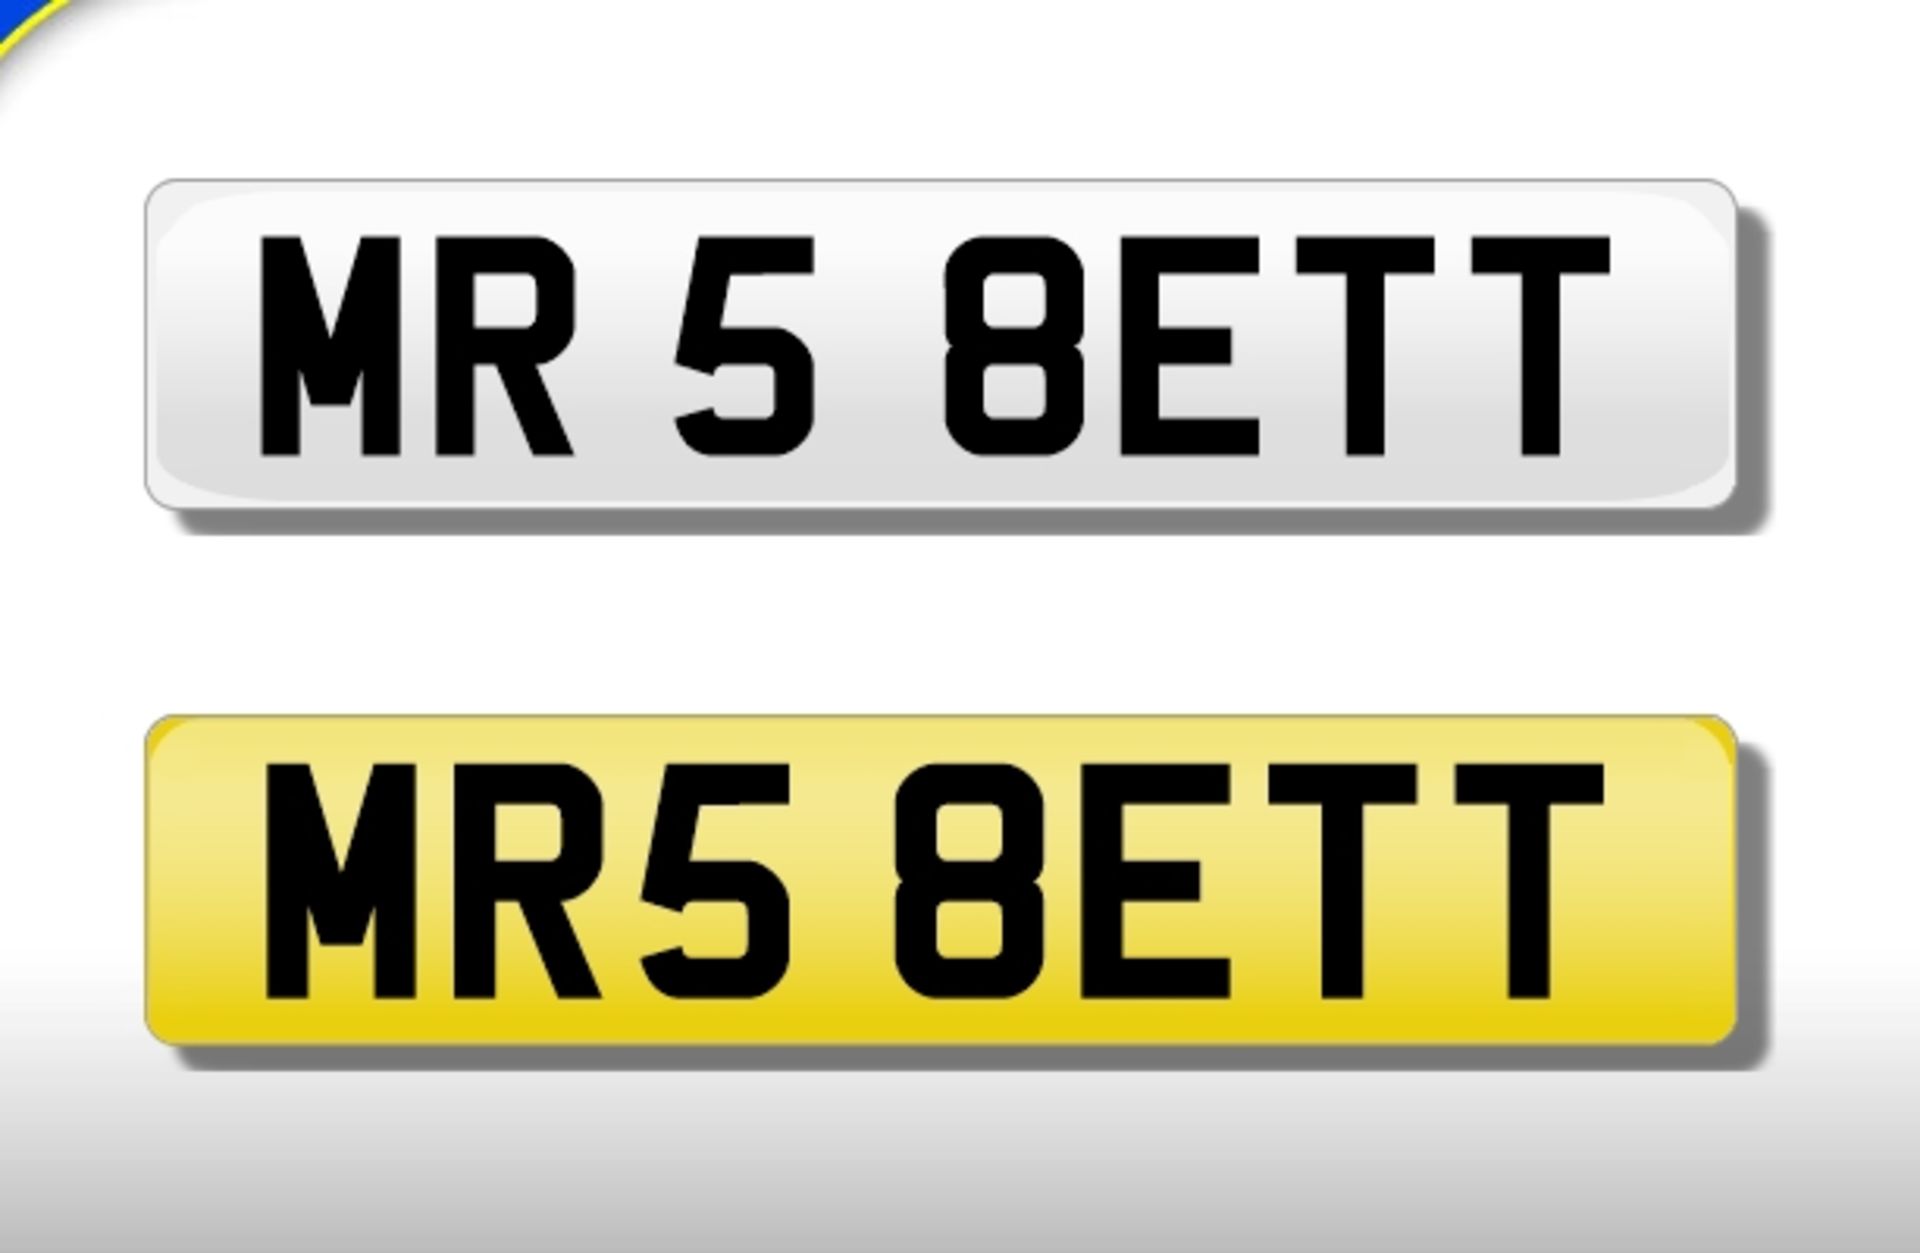 RARE OPPORTUNITY TO PURCHASE NUMBER PLATE "MR5 8ETT" ON RETENTION.